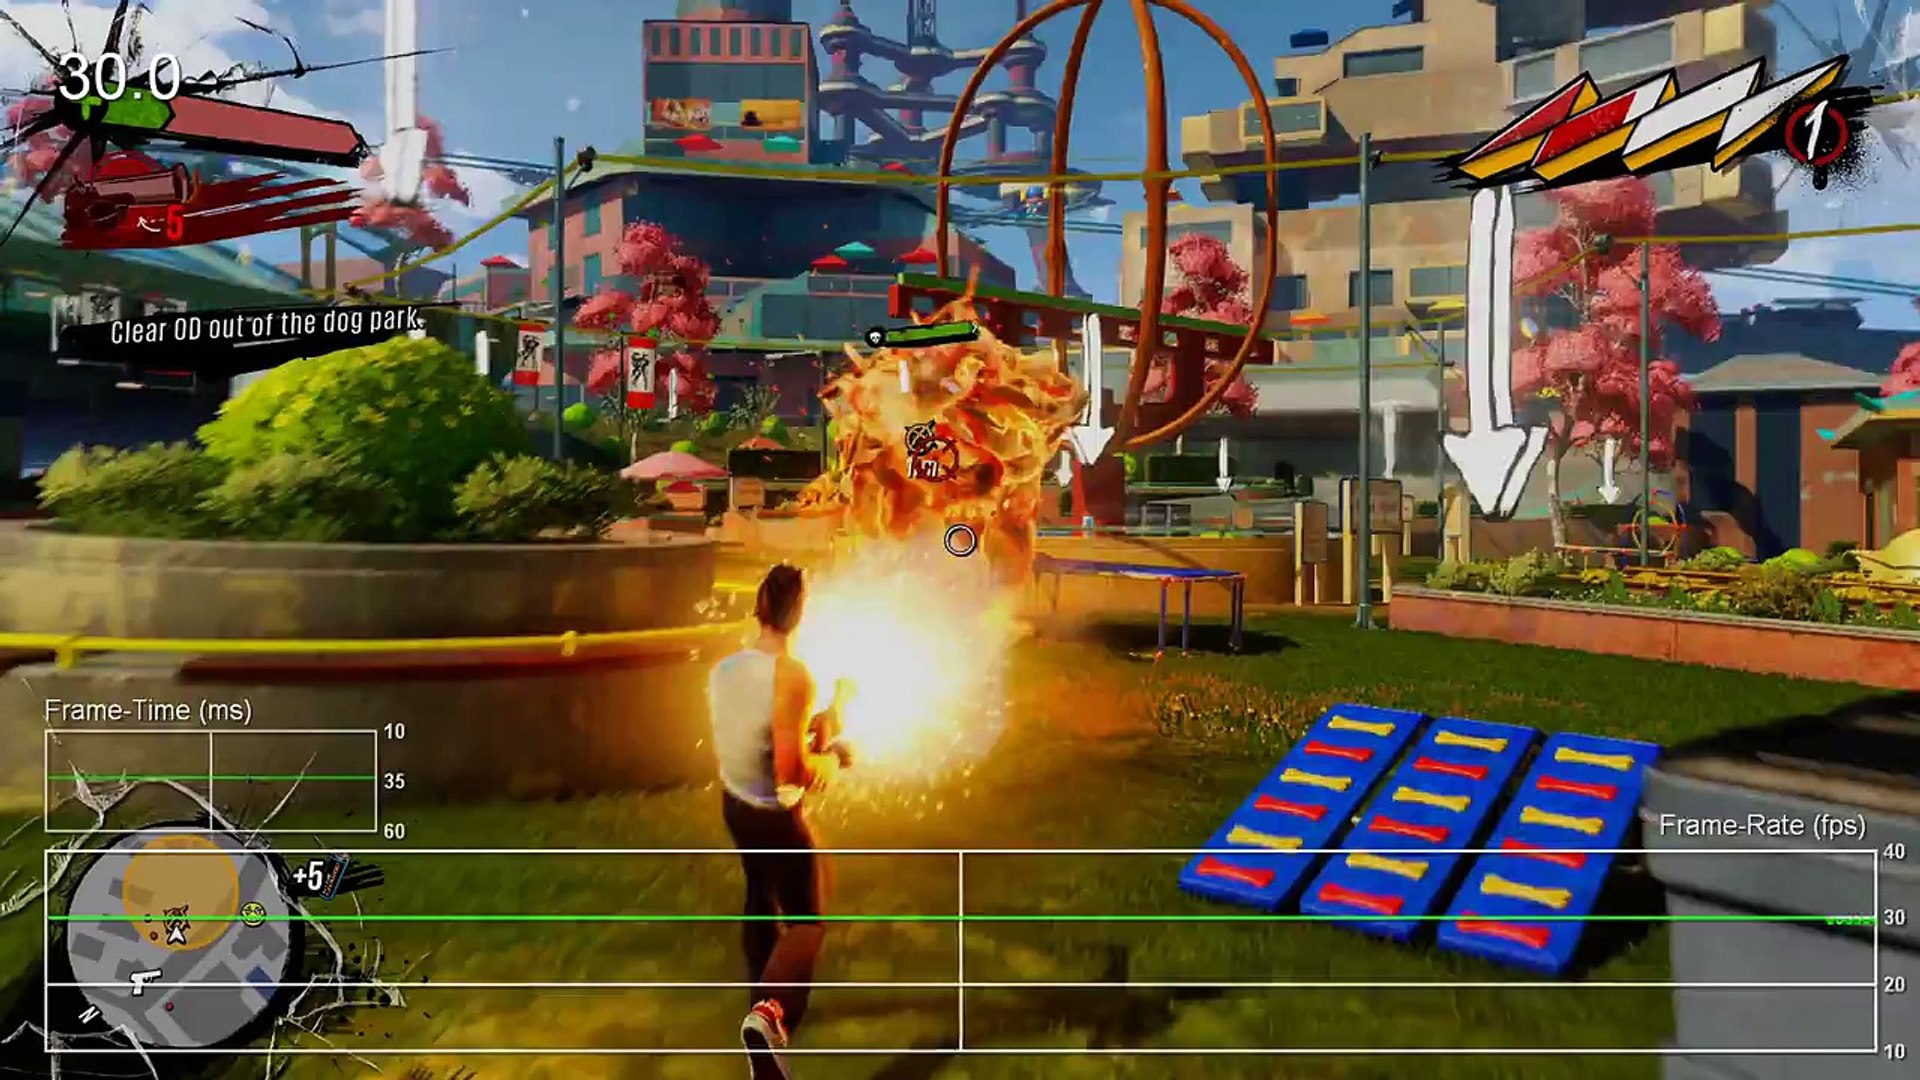 Sunset Overdrive Gameplay (PC) 